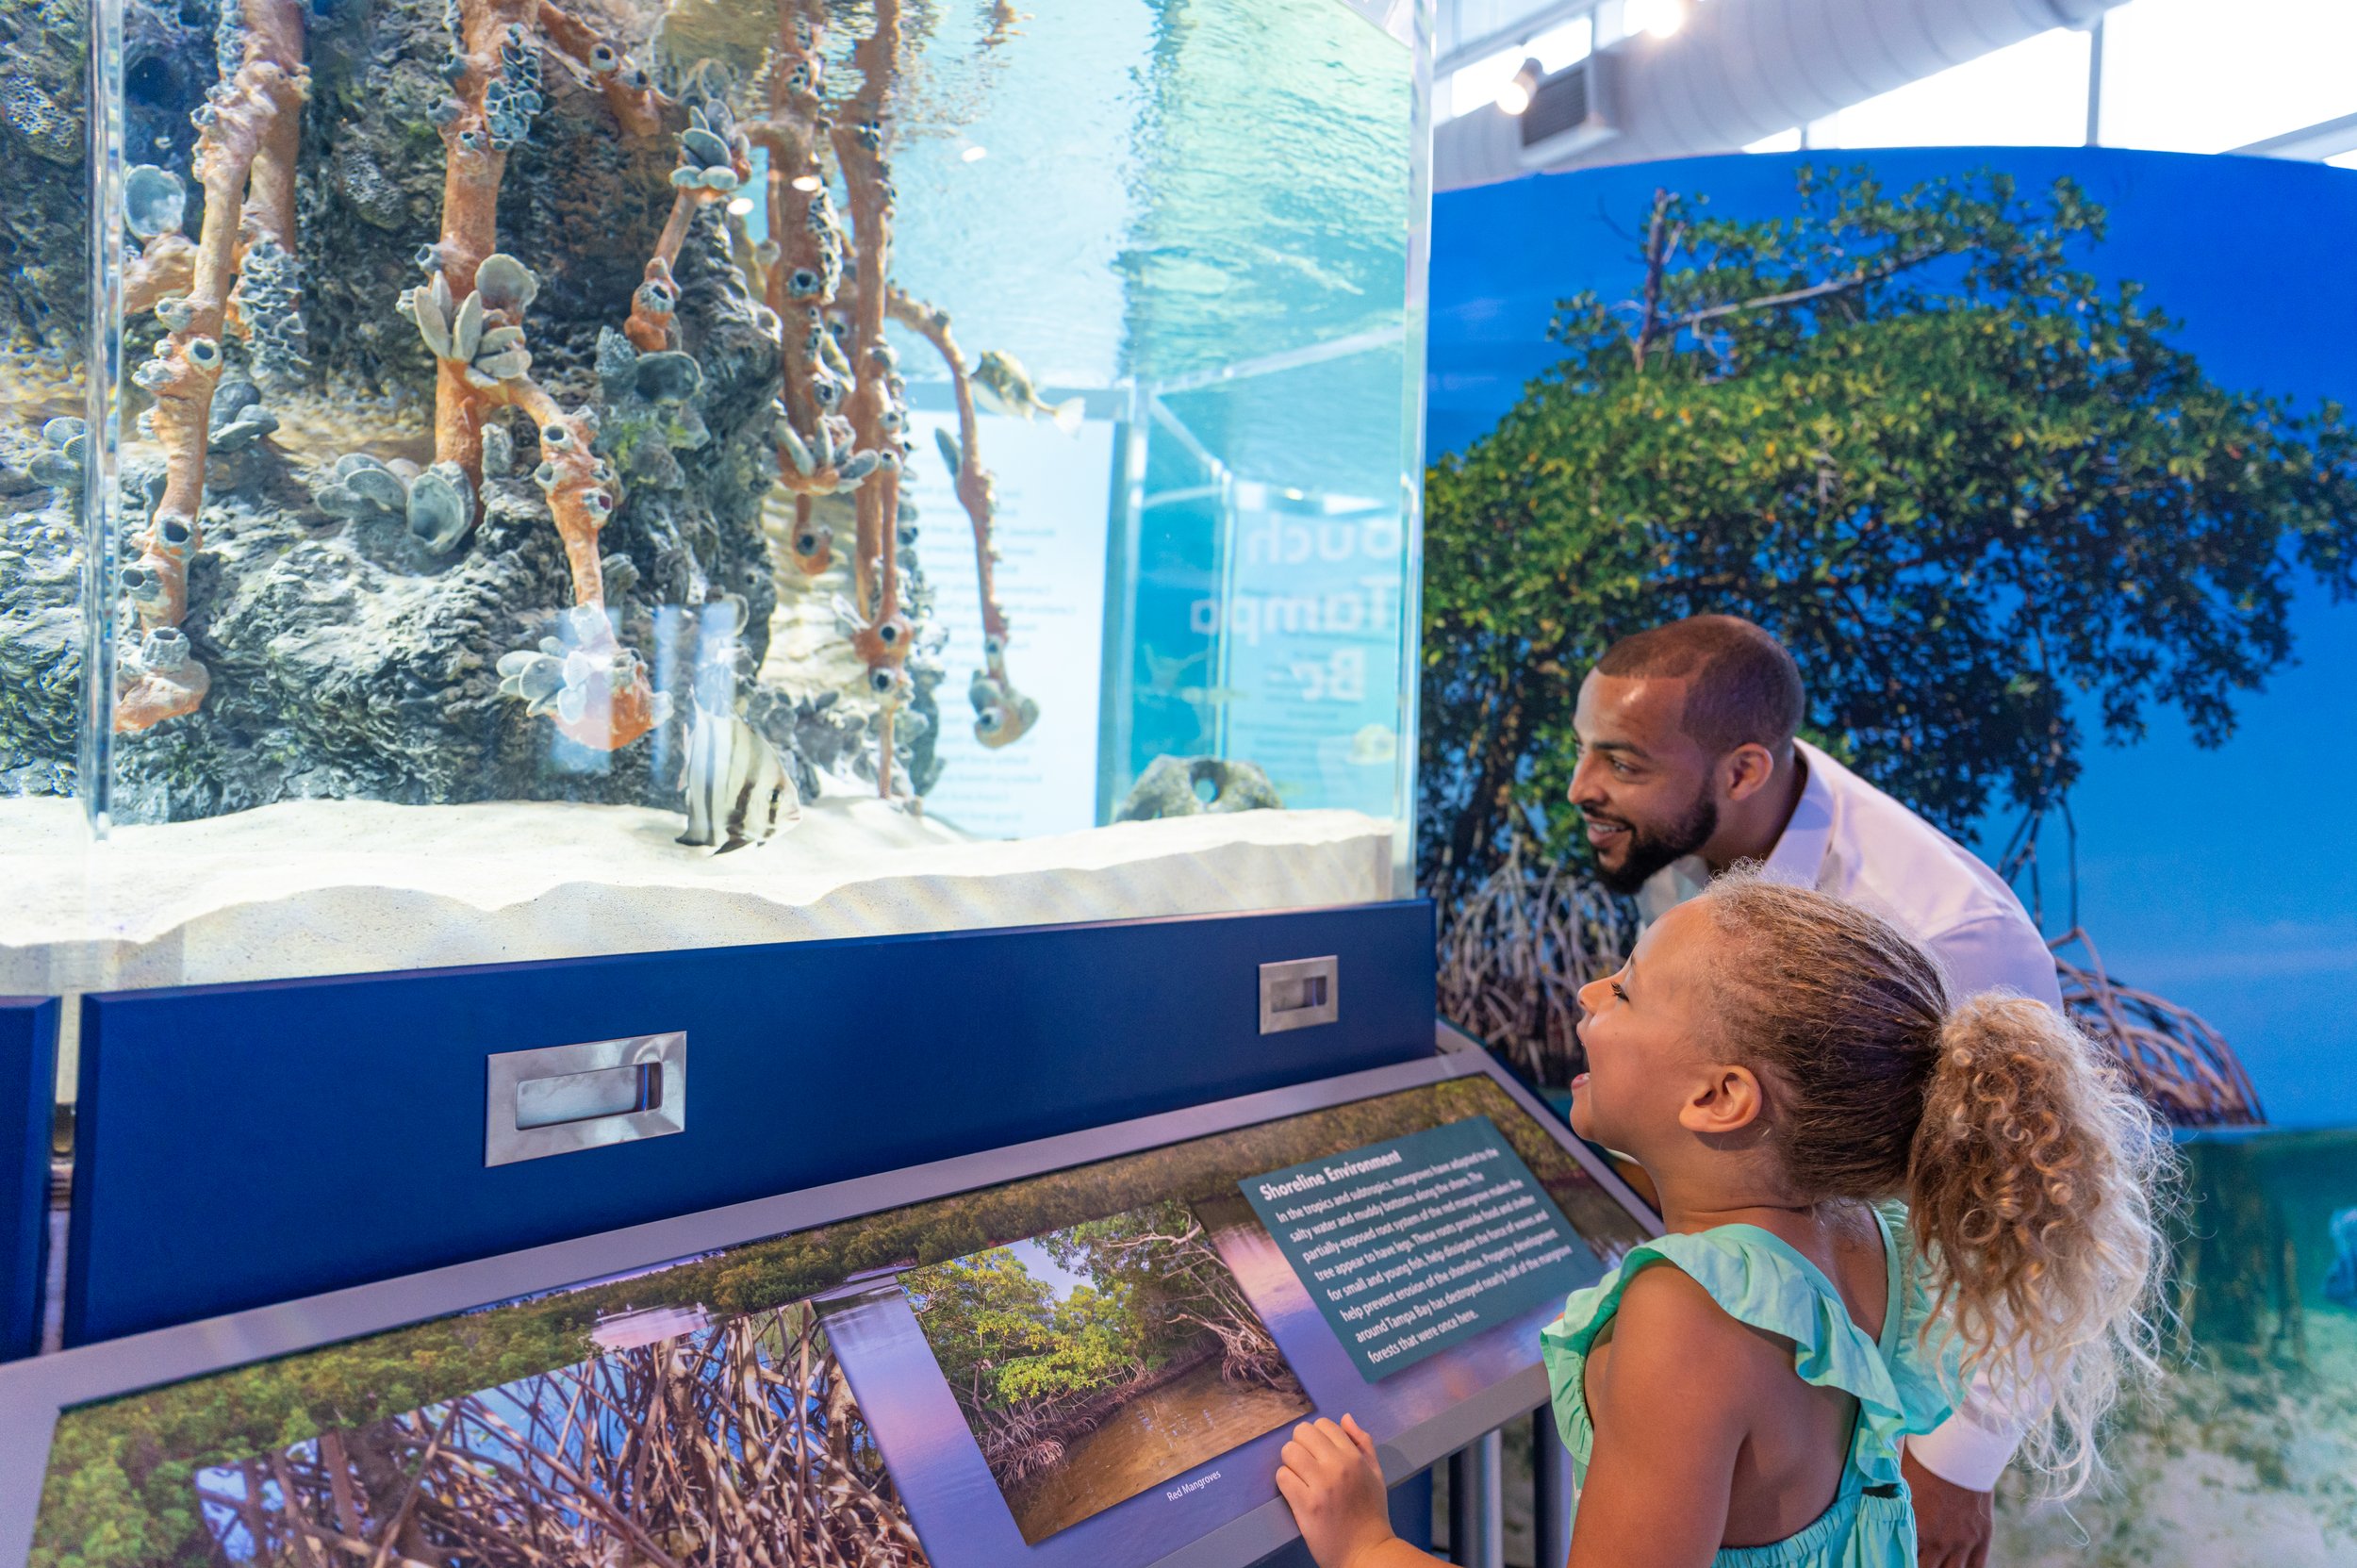 This is a photo from Tampa Bay Watch Discovery Center - Sensory Sunday